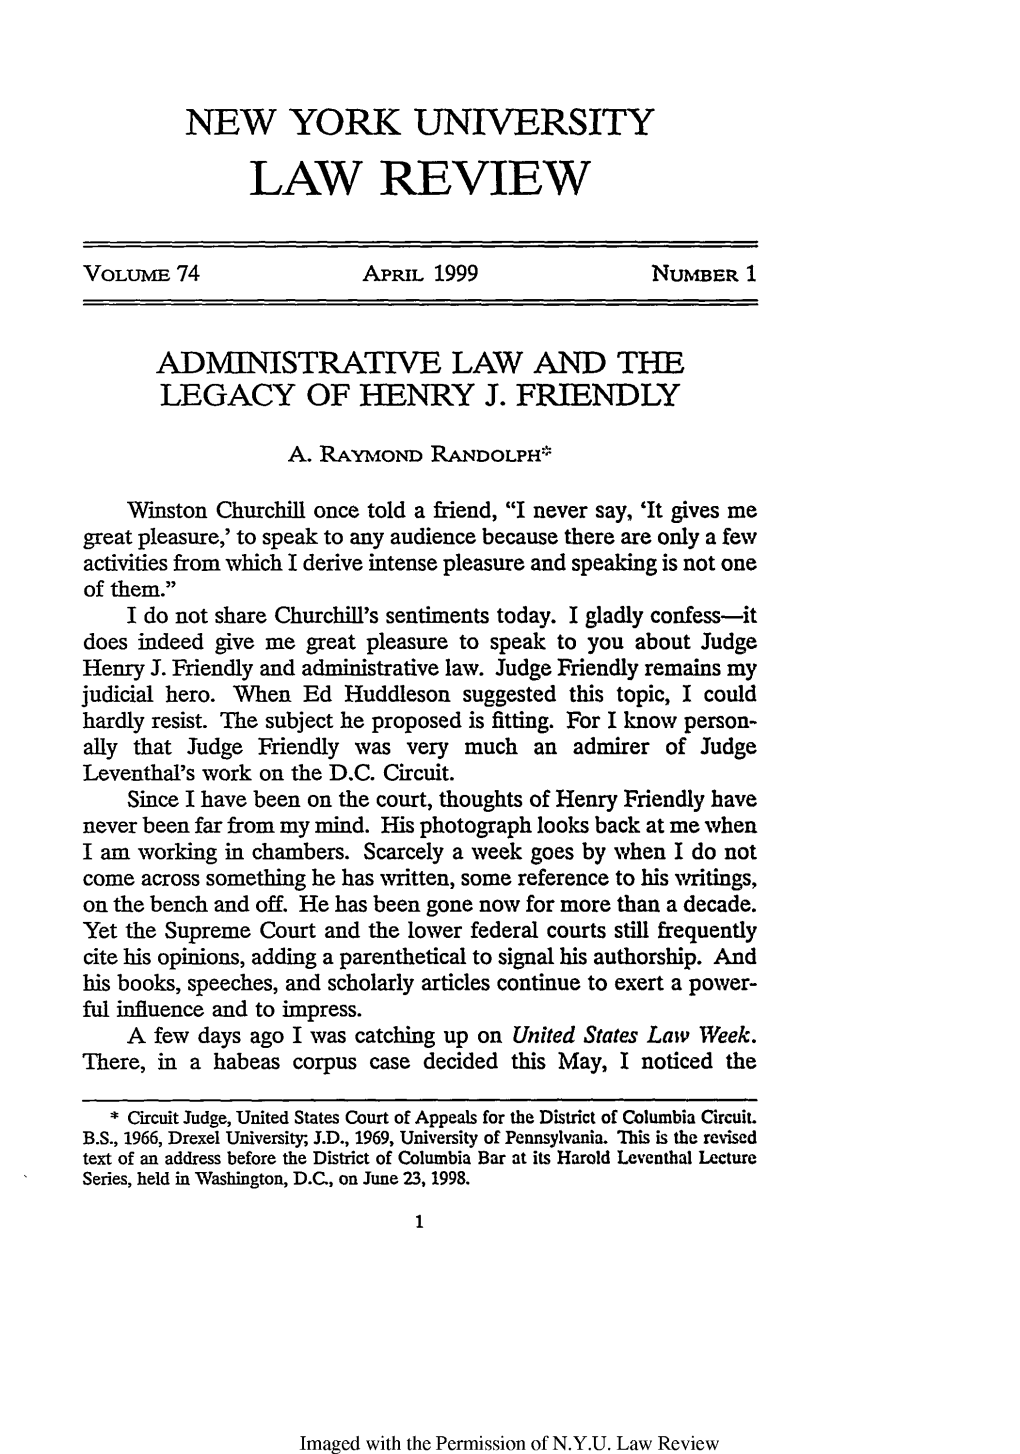 Administrative Law and the Legacy of Henry J. Friendly